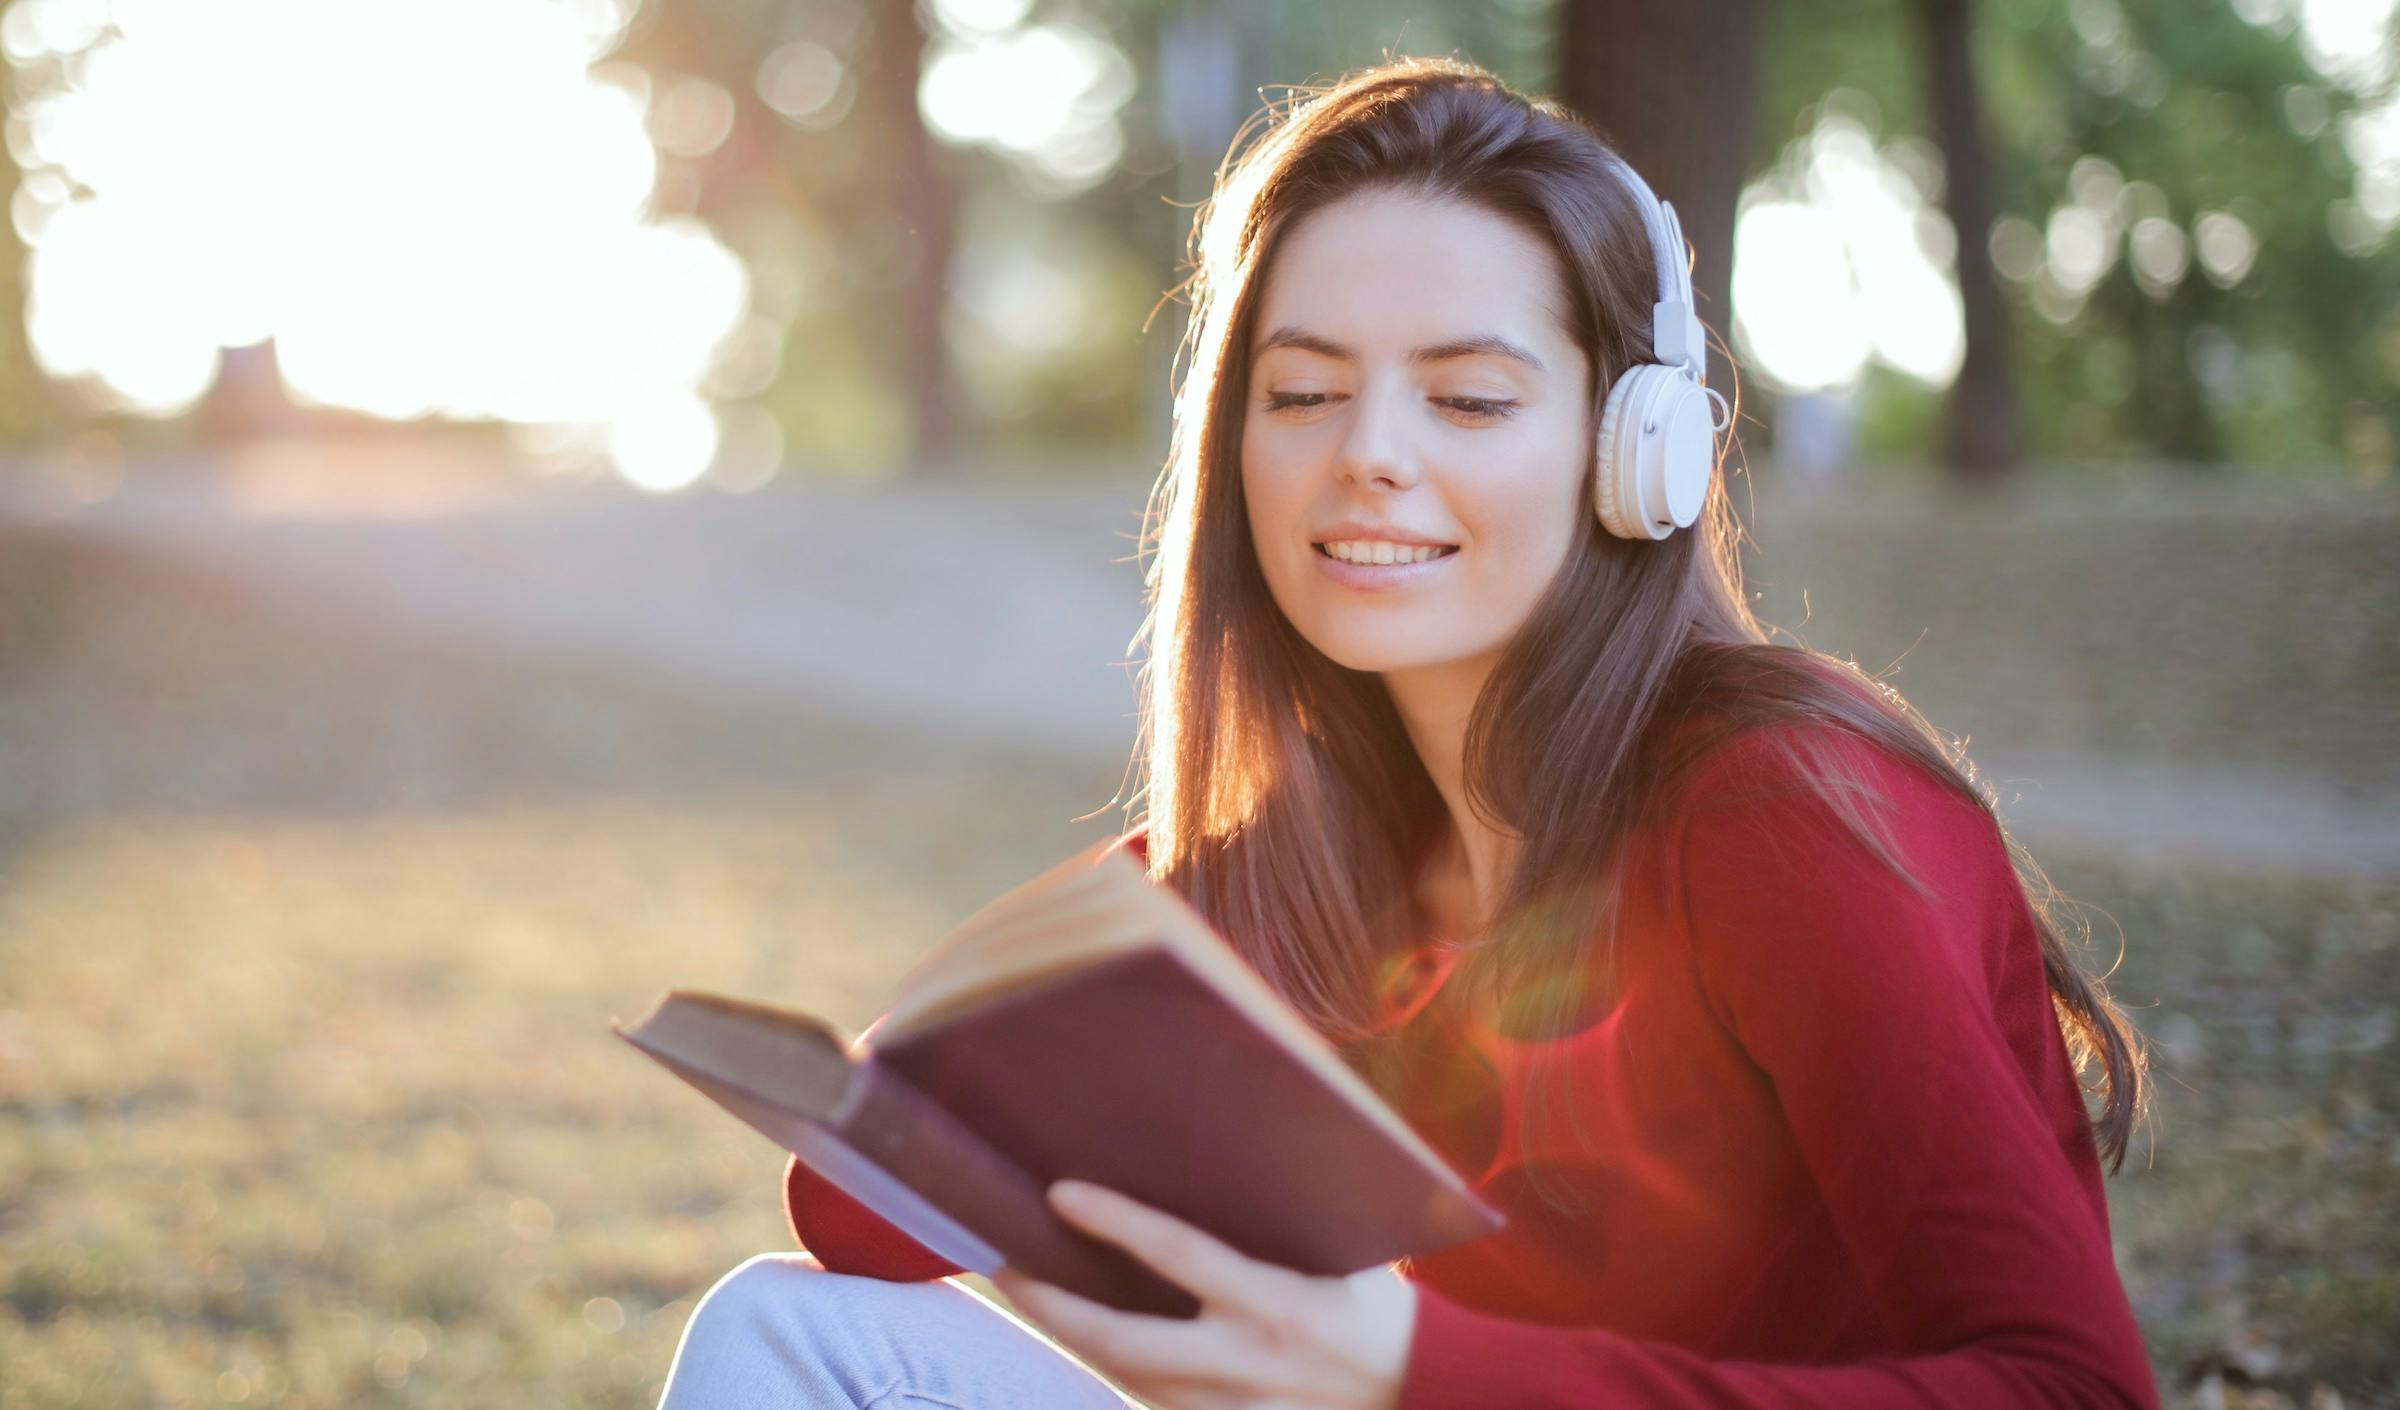 Young woman with headphones listening to music and reading a book.